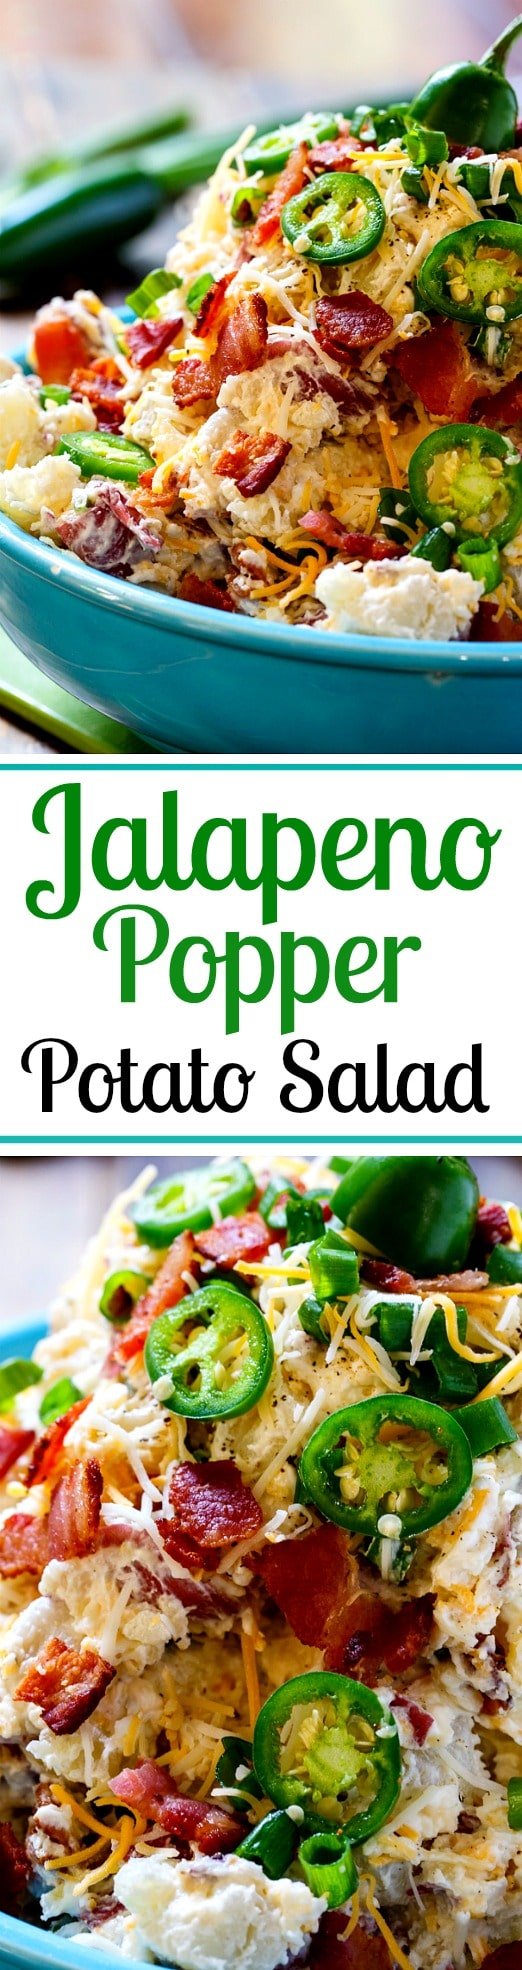 Jalapeno Popper Potato Salad flavored with cream cheese, bacon, and lots of jalapenos.